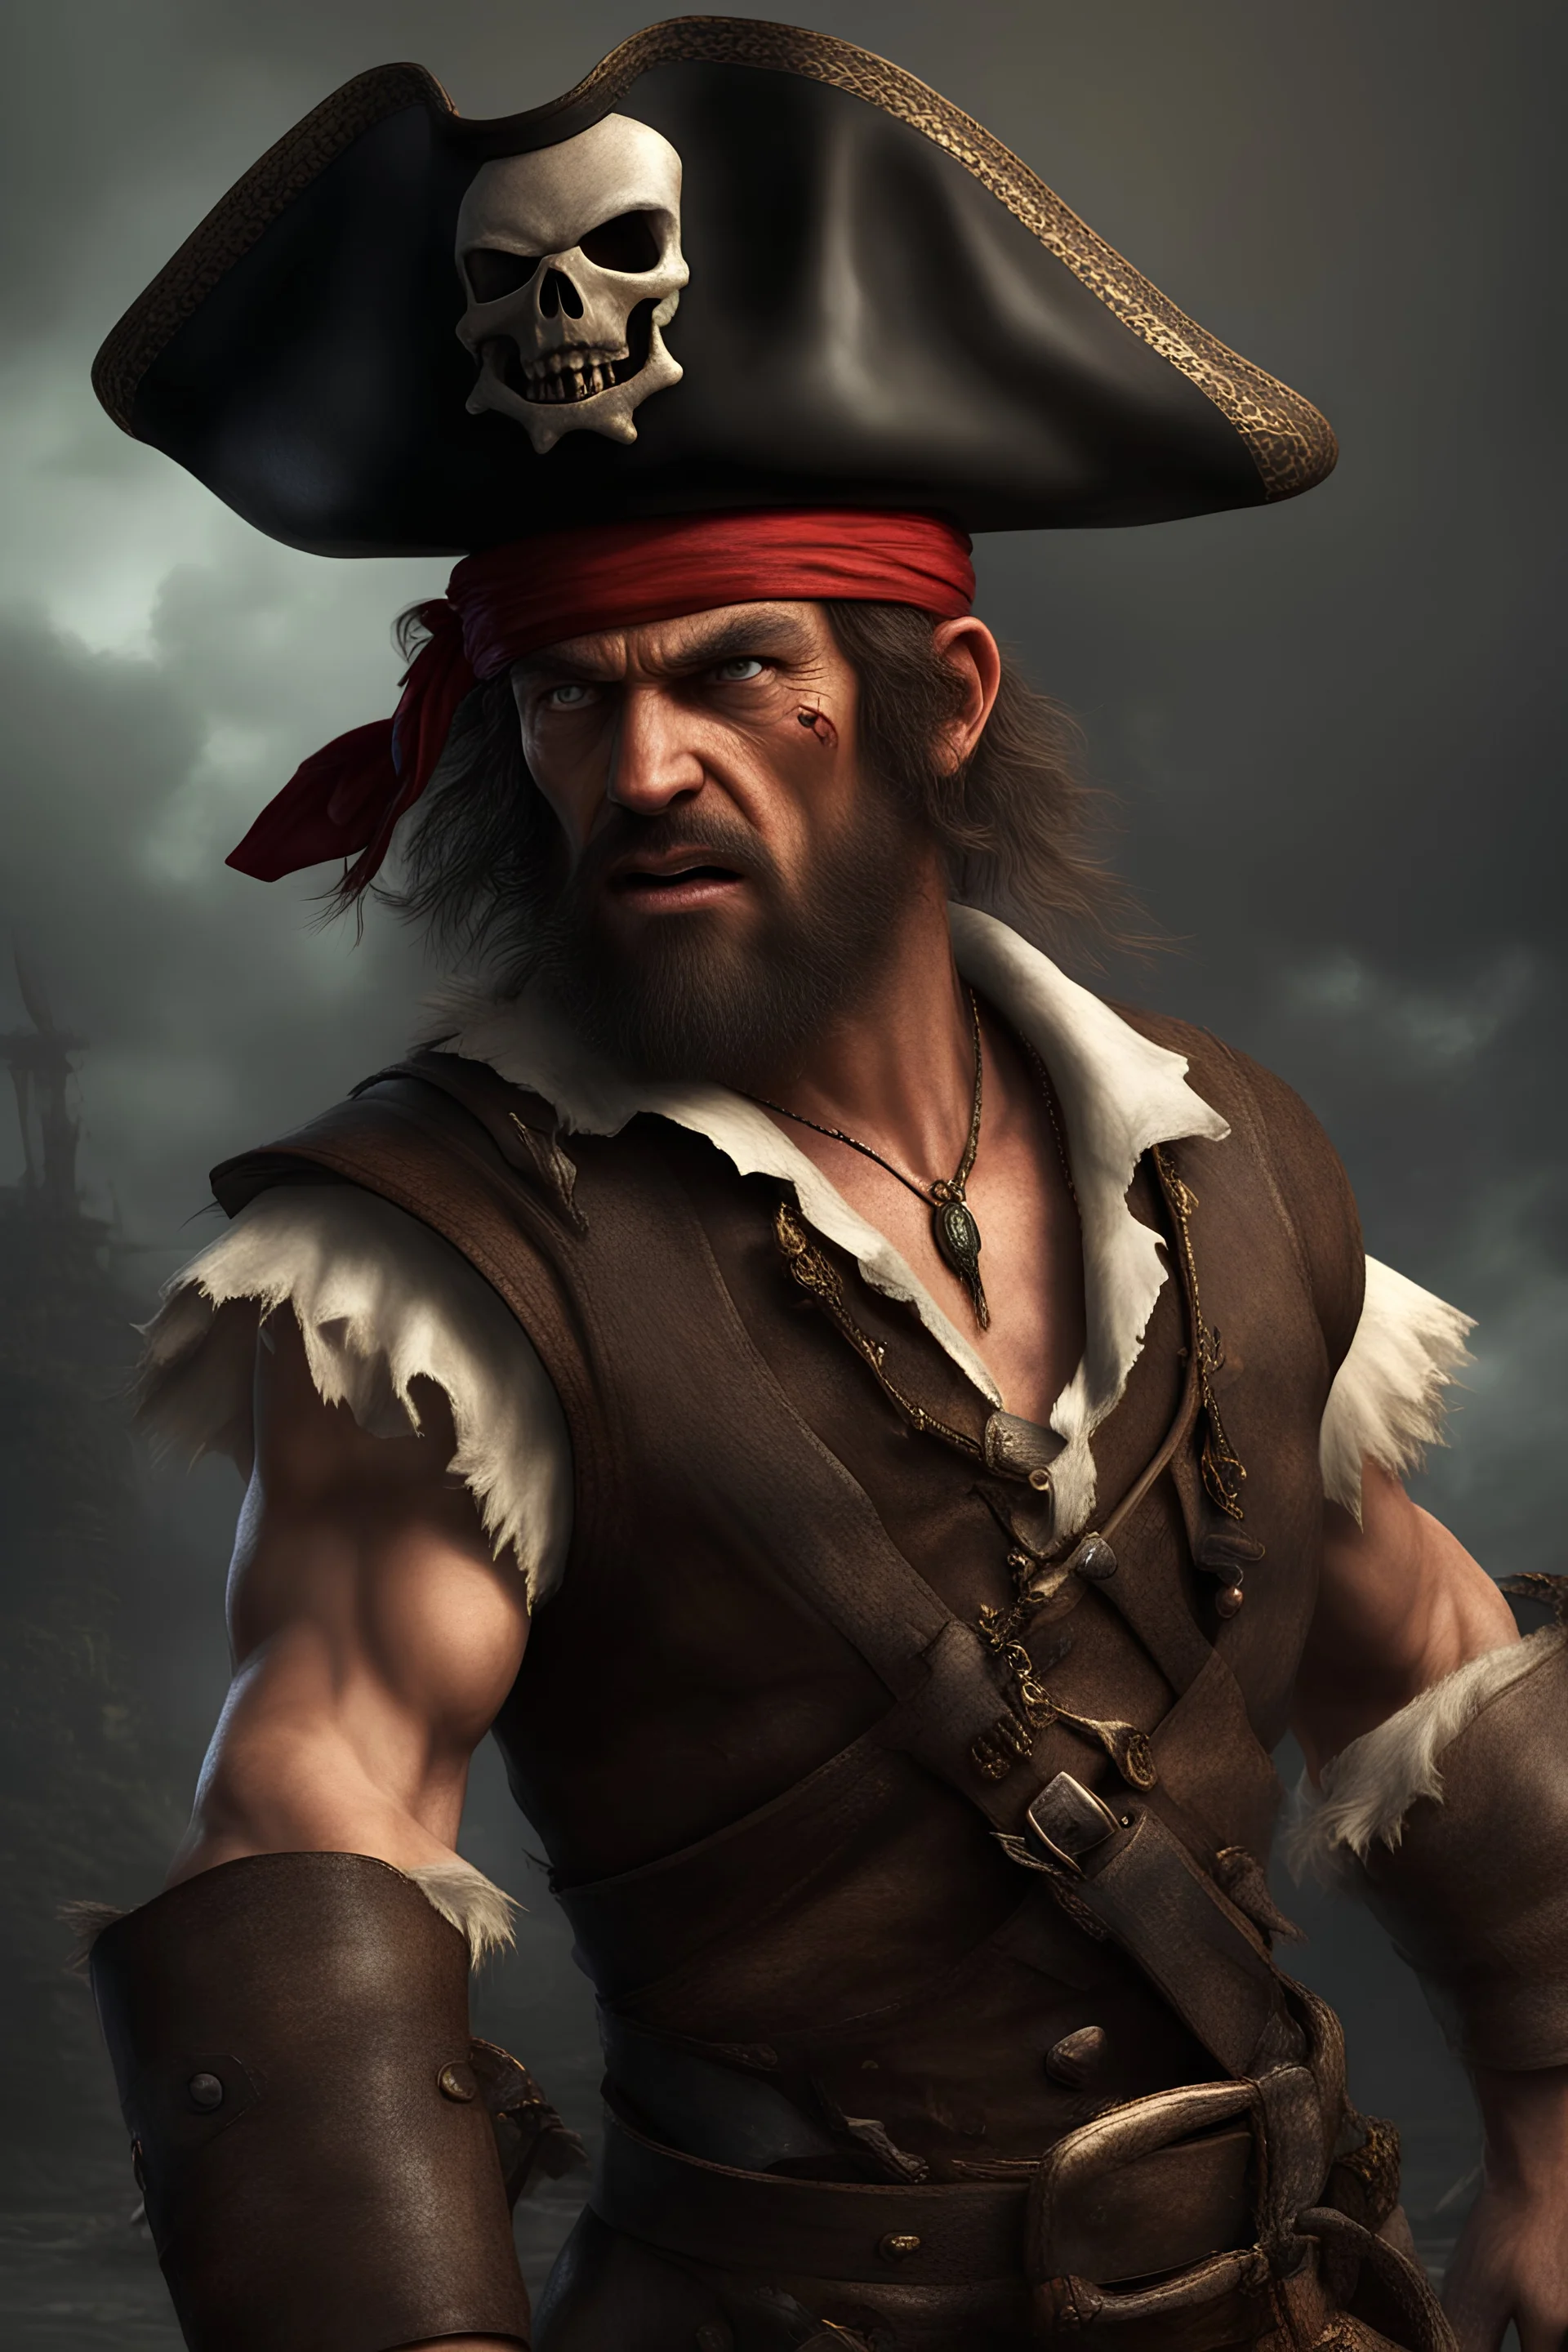 A photorealistic picture of an angry, but handsome short pirate